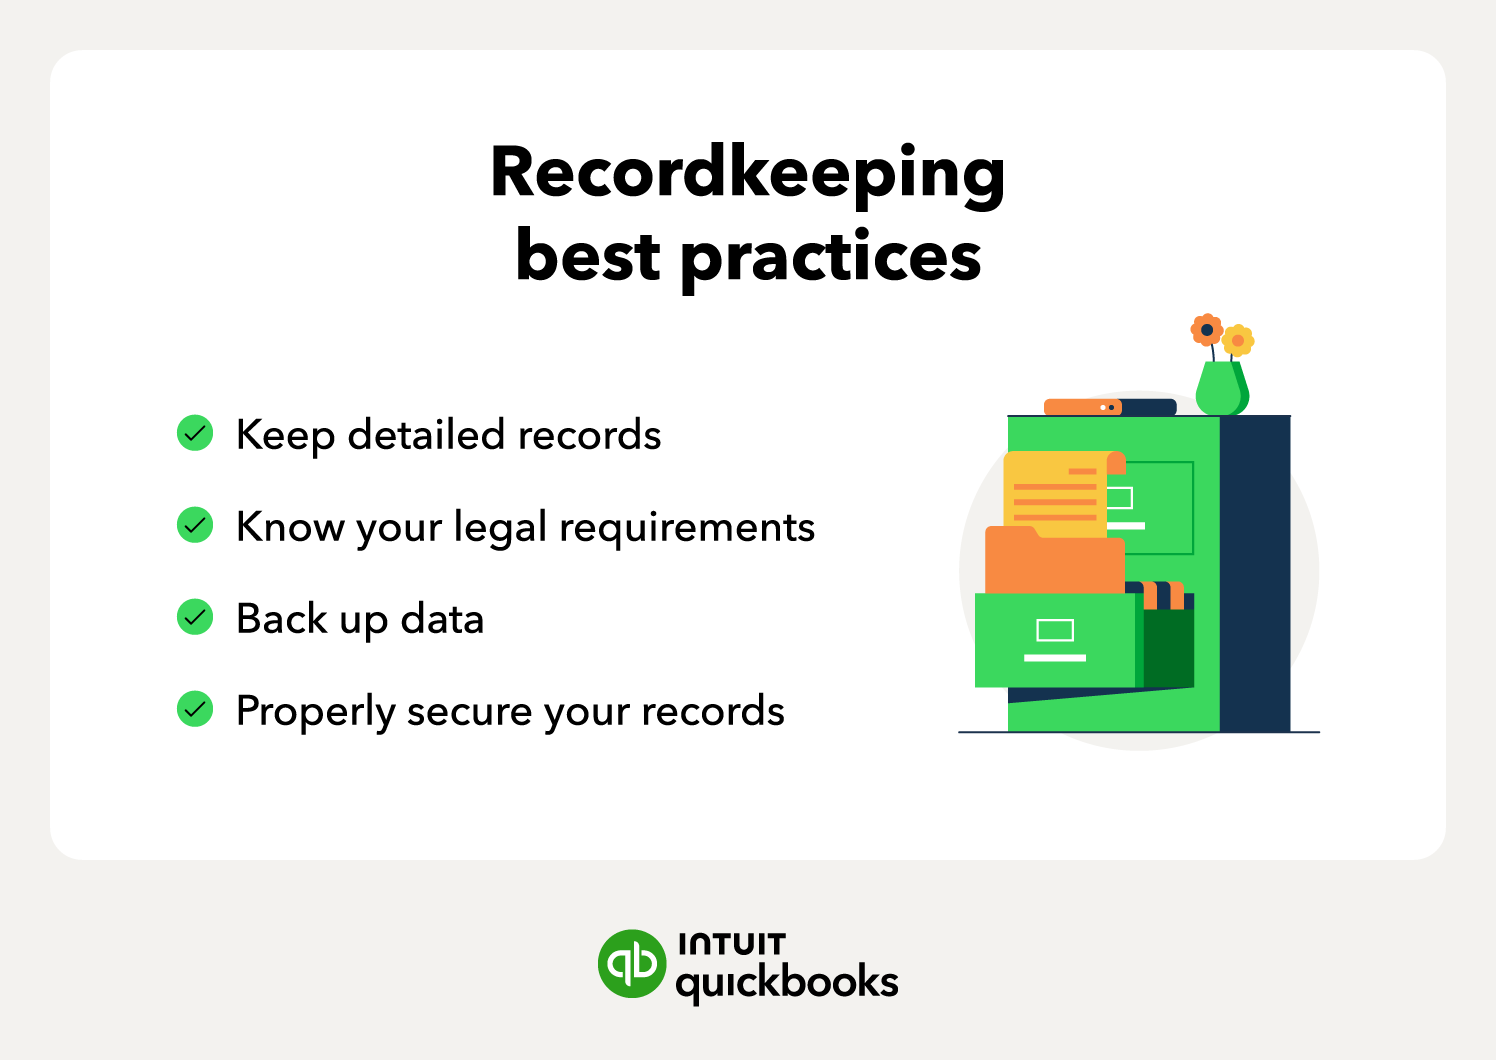 An illustration of recordkeeping best practices.